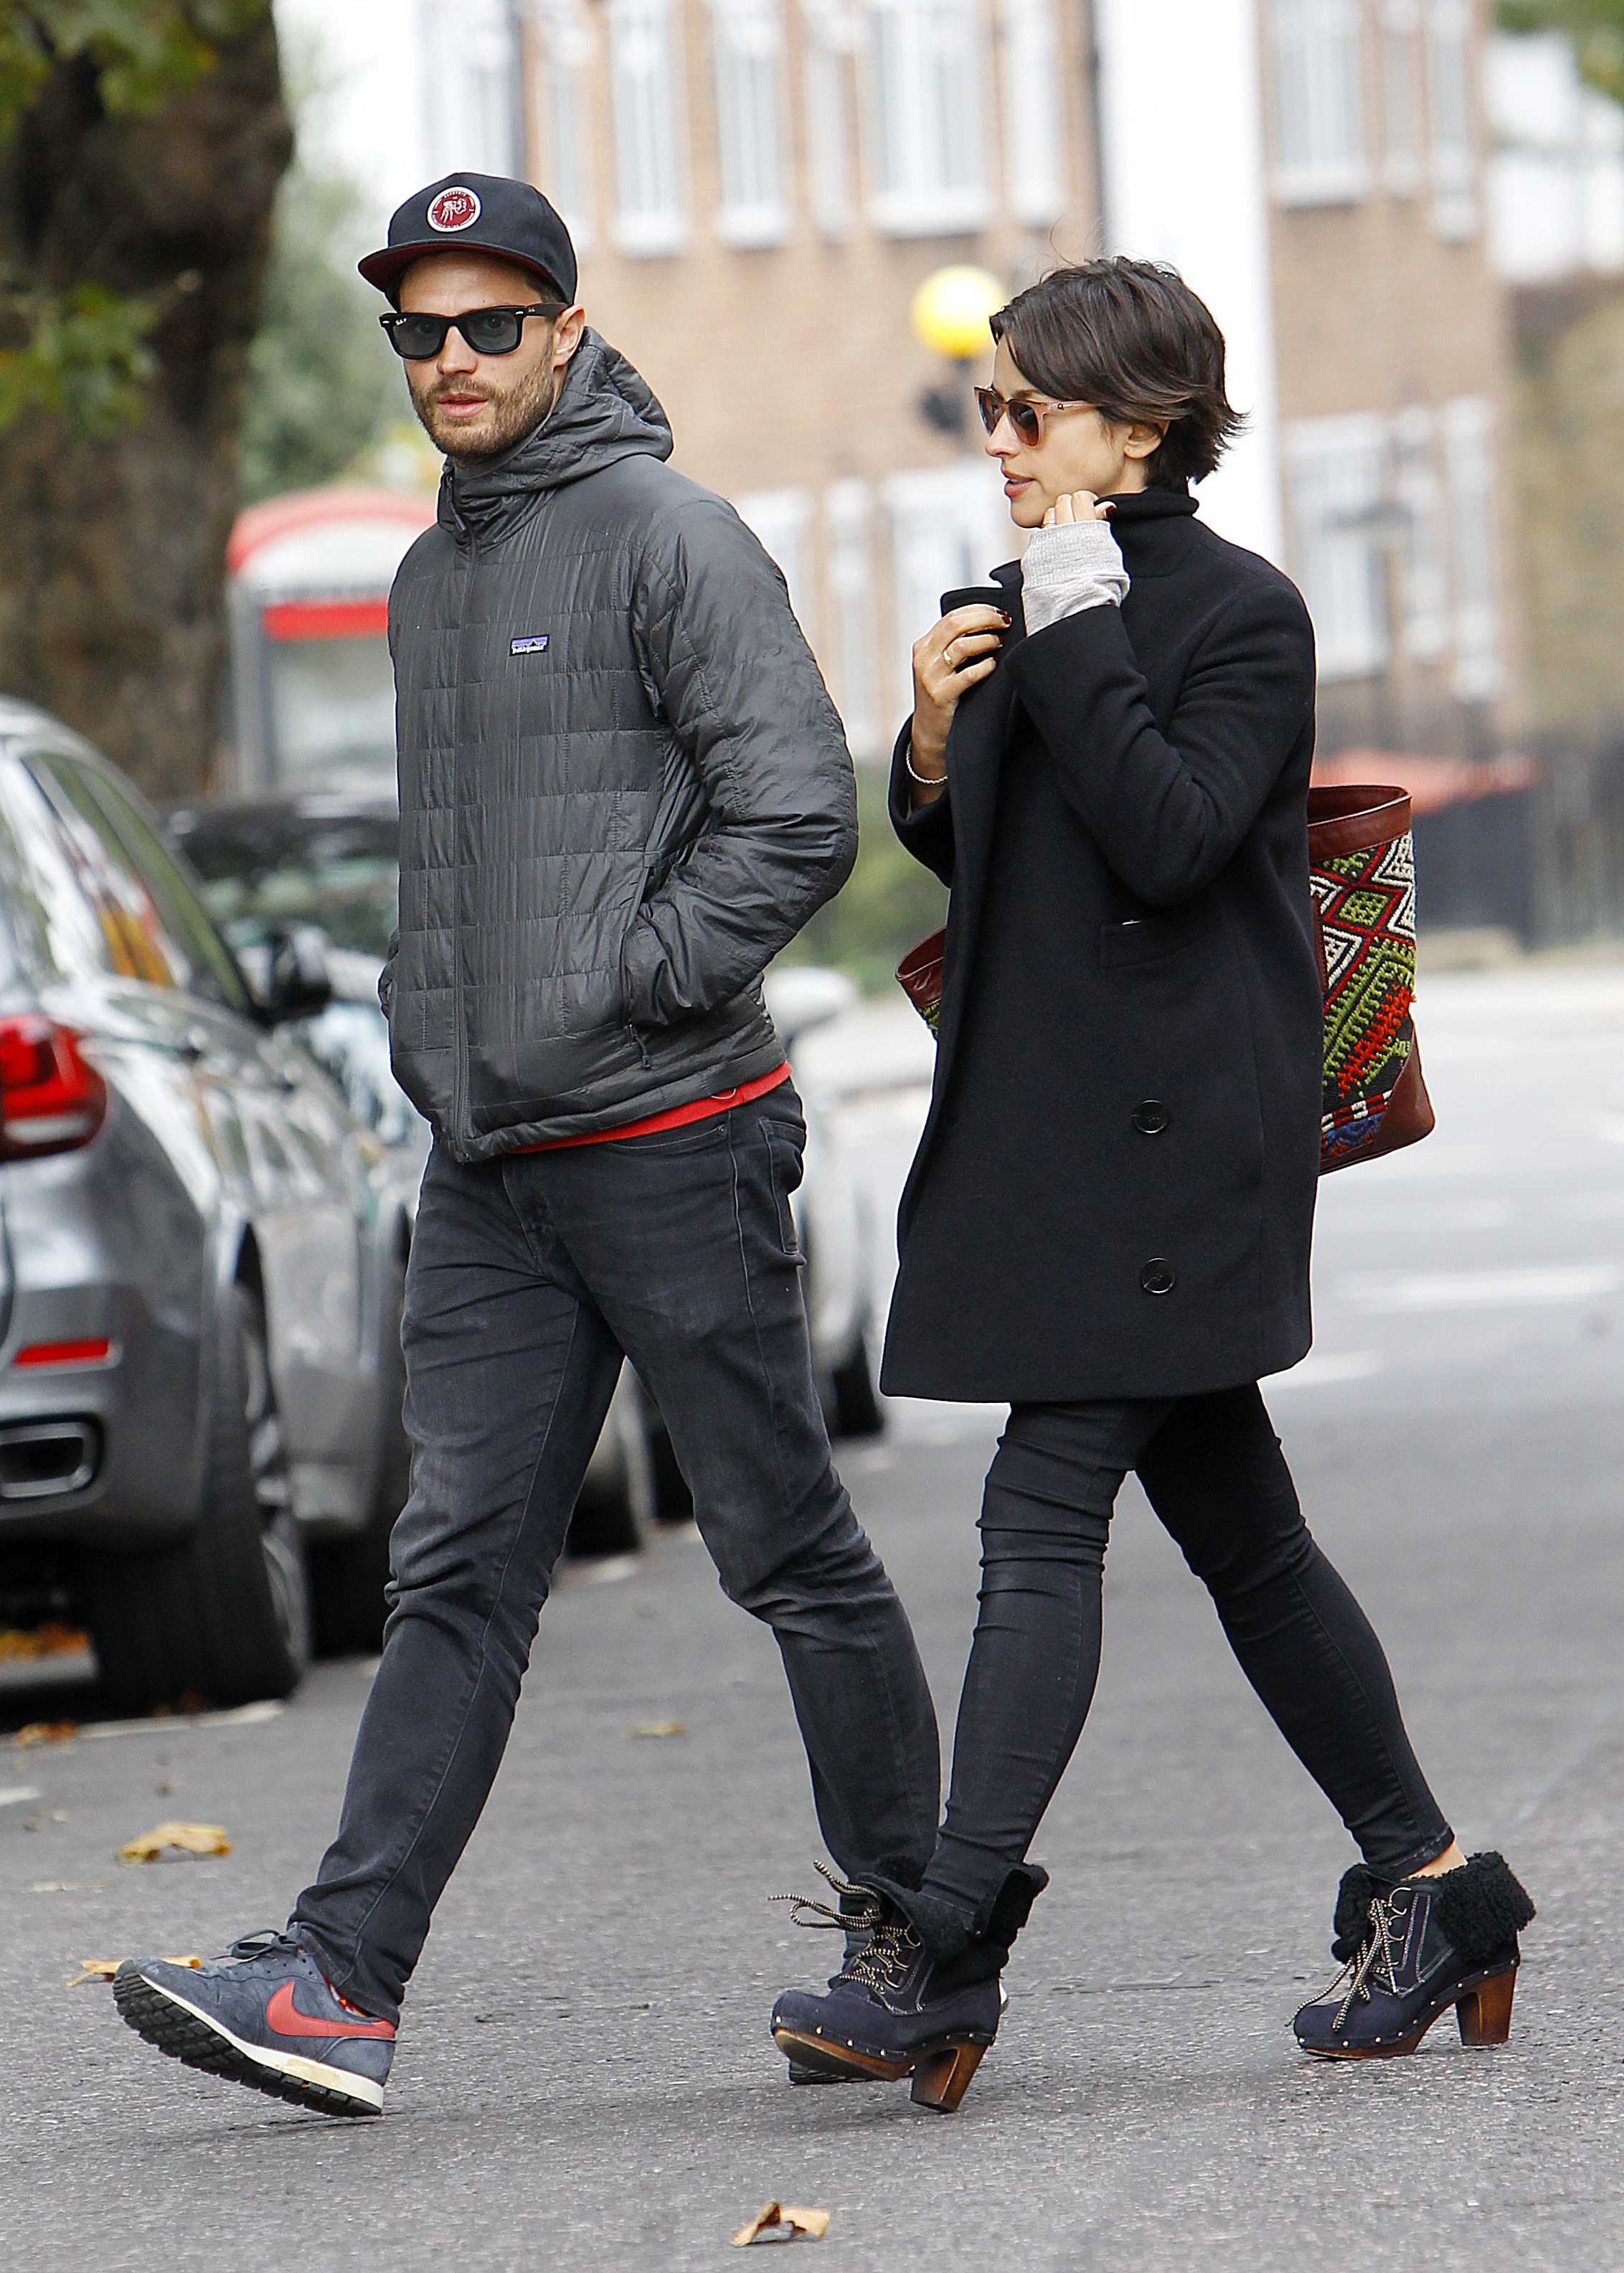 LONDON, ENGLAND - OCTOBER 13: (EXCLUSIVE COVERAGE) (MINIMUM ONLINE/WEB USAGE FEE £150 FOR THE SET) Jamie Dornan and his wife Amelia Warner sighting on October 13, 2015 in London, England. (Photo by Crowder/Legge/GC Images)